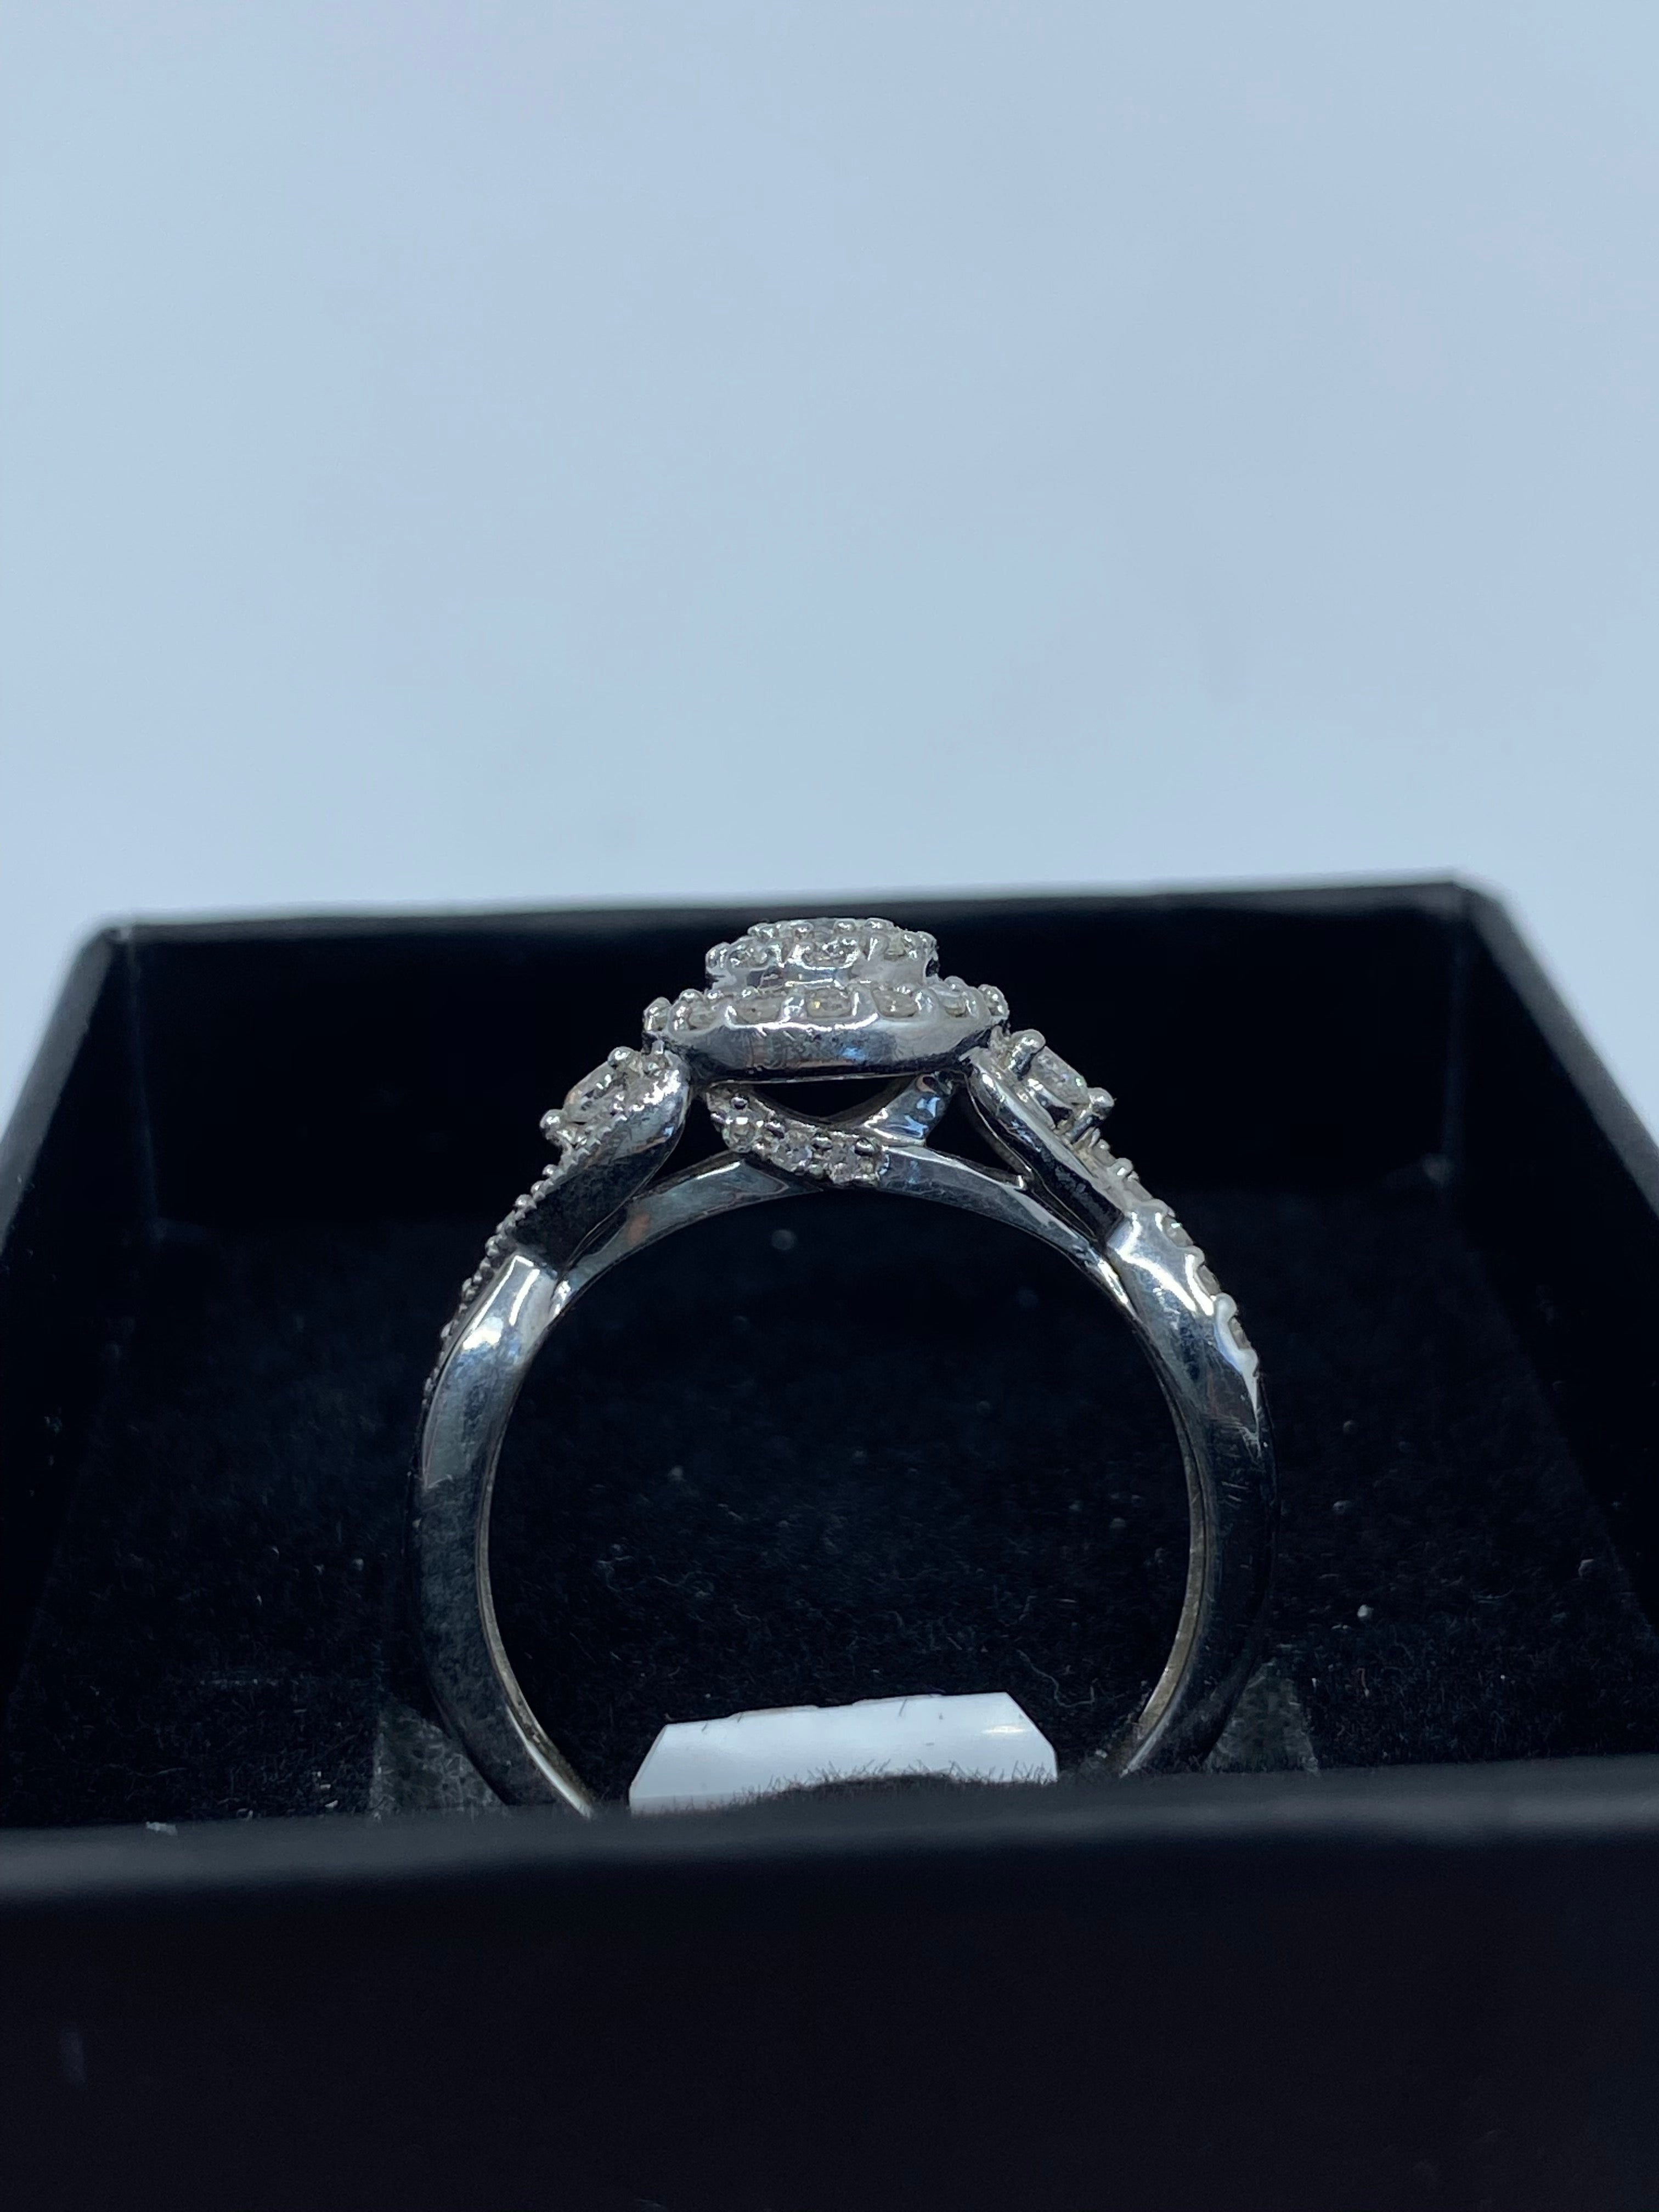 9ct White Gold & Diamond - HJ016 - Hallmark Jewellers Formby & The Jewellers Bench Widnes